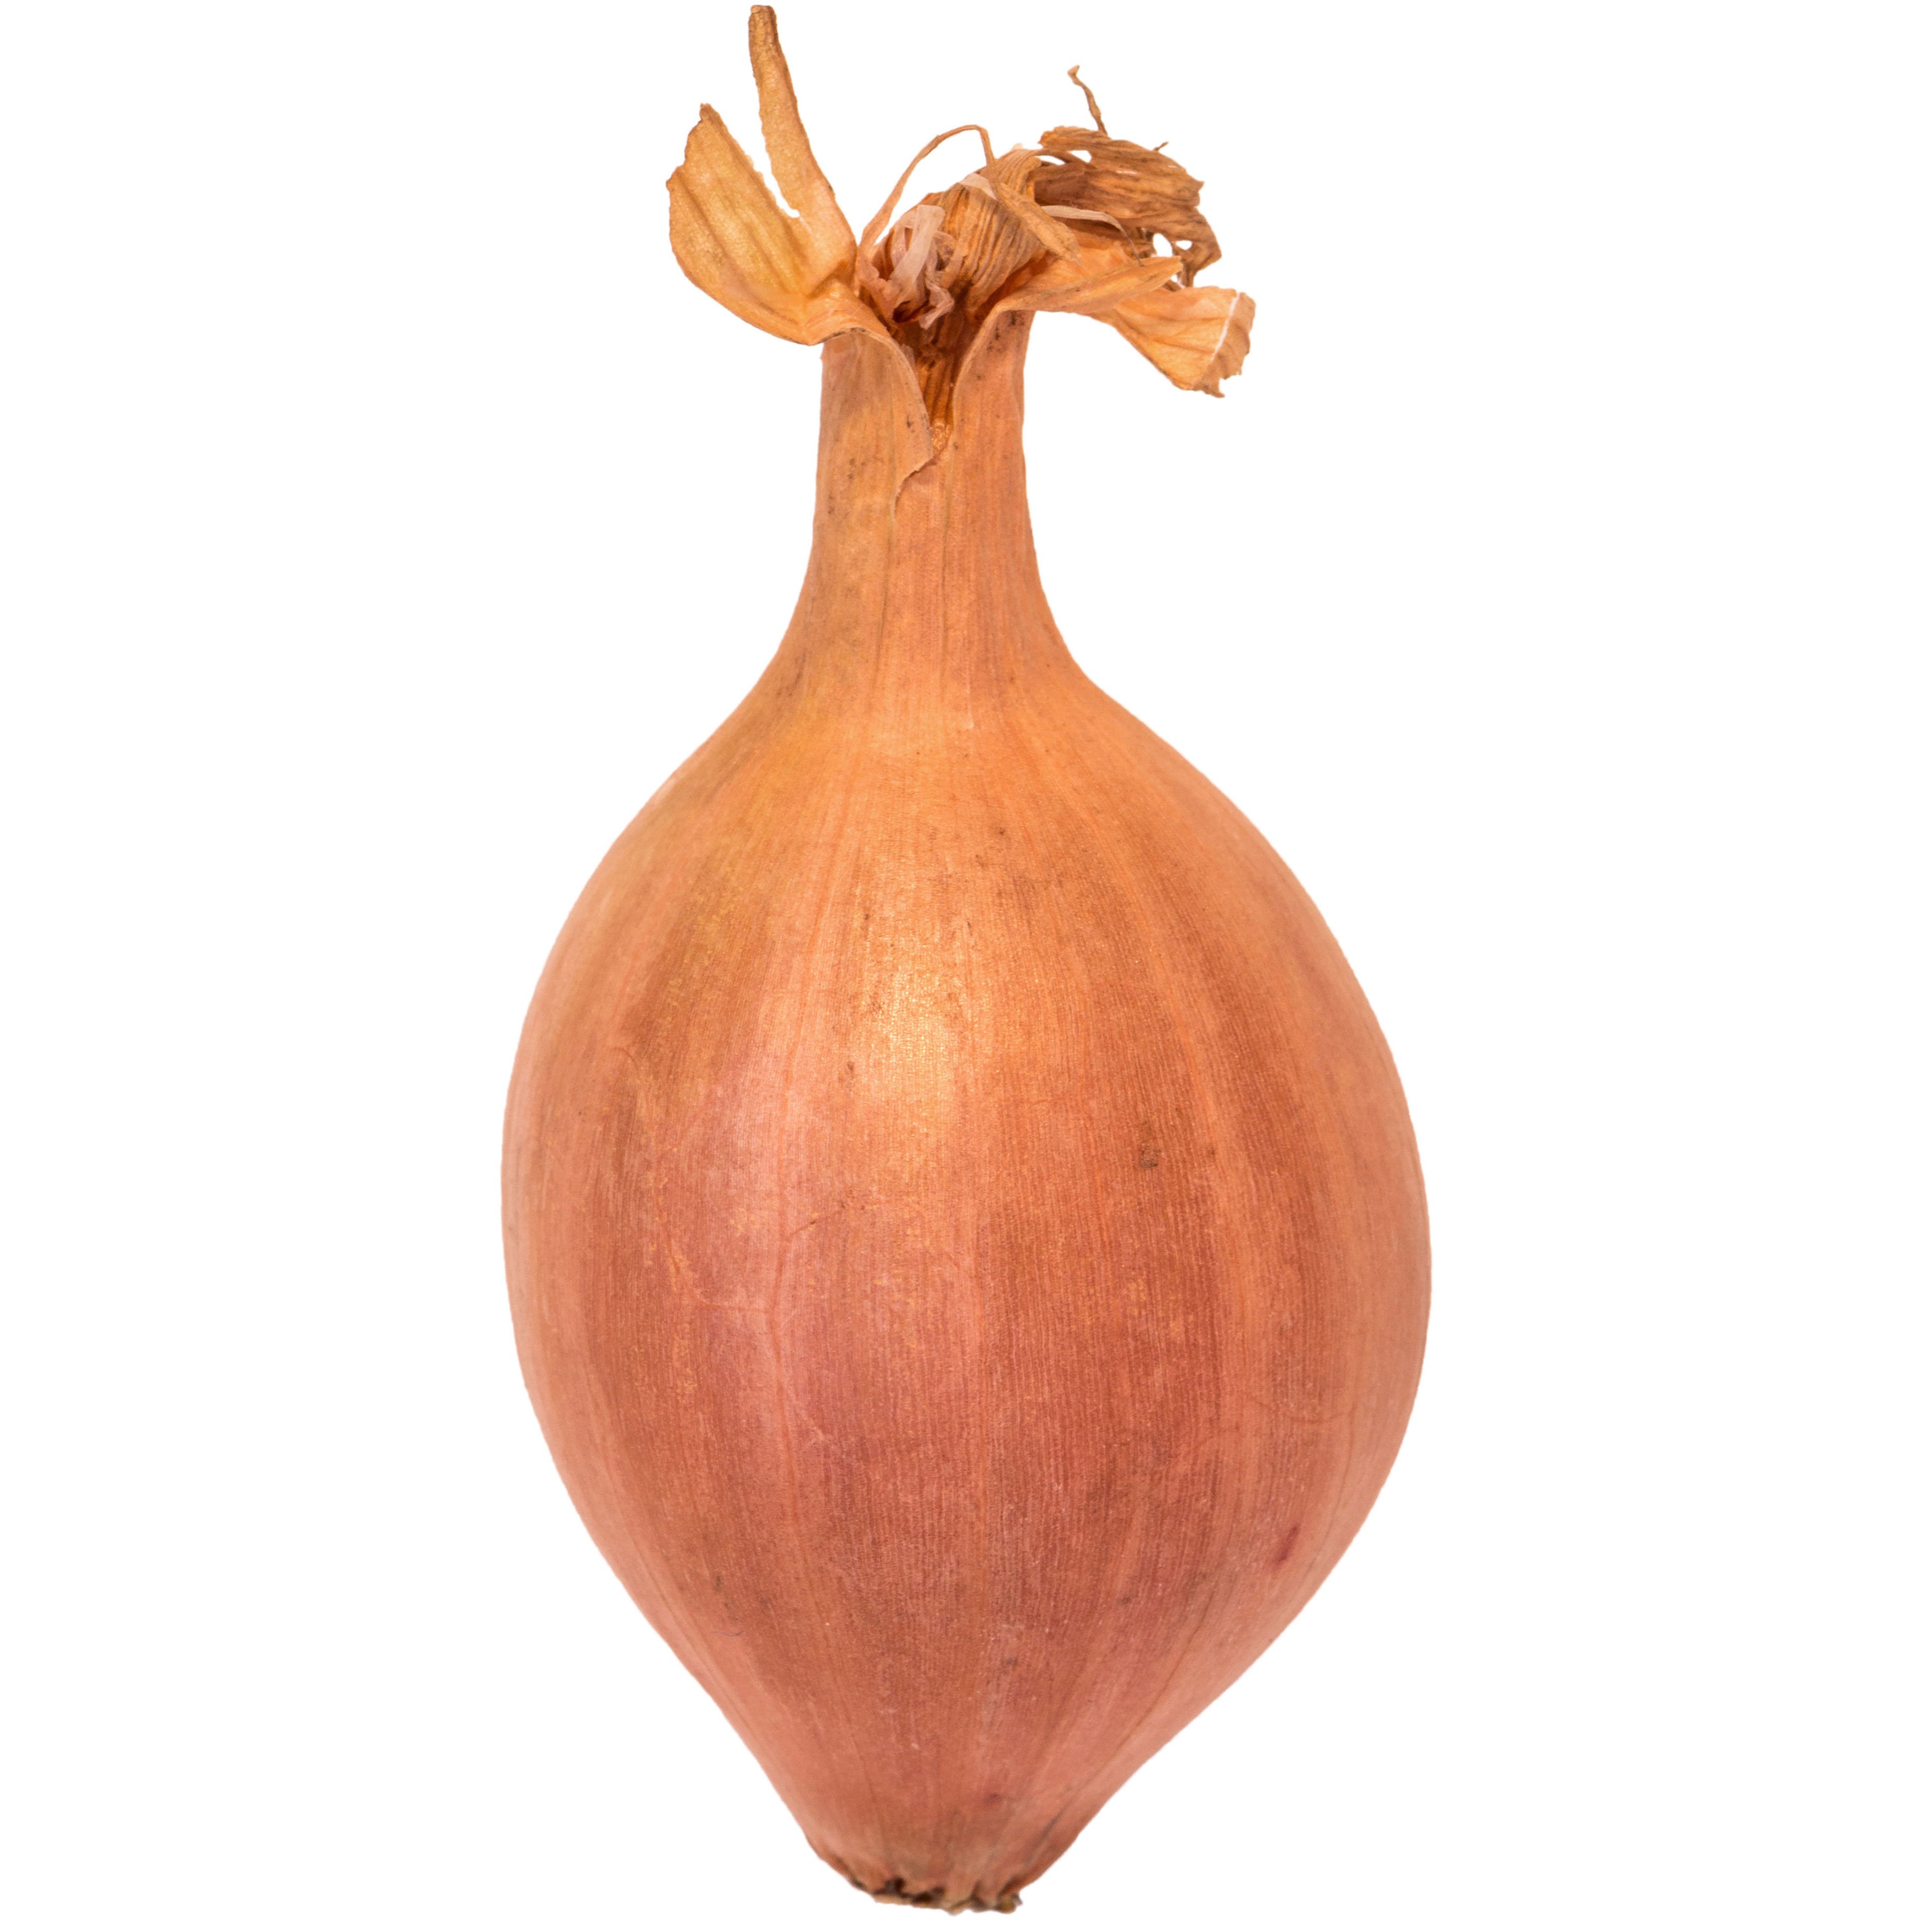 Best FAQ: What Are Shallots?